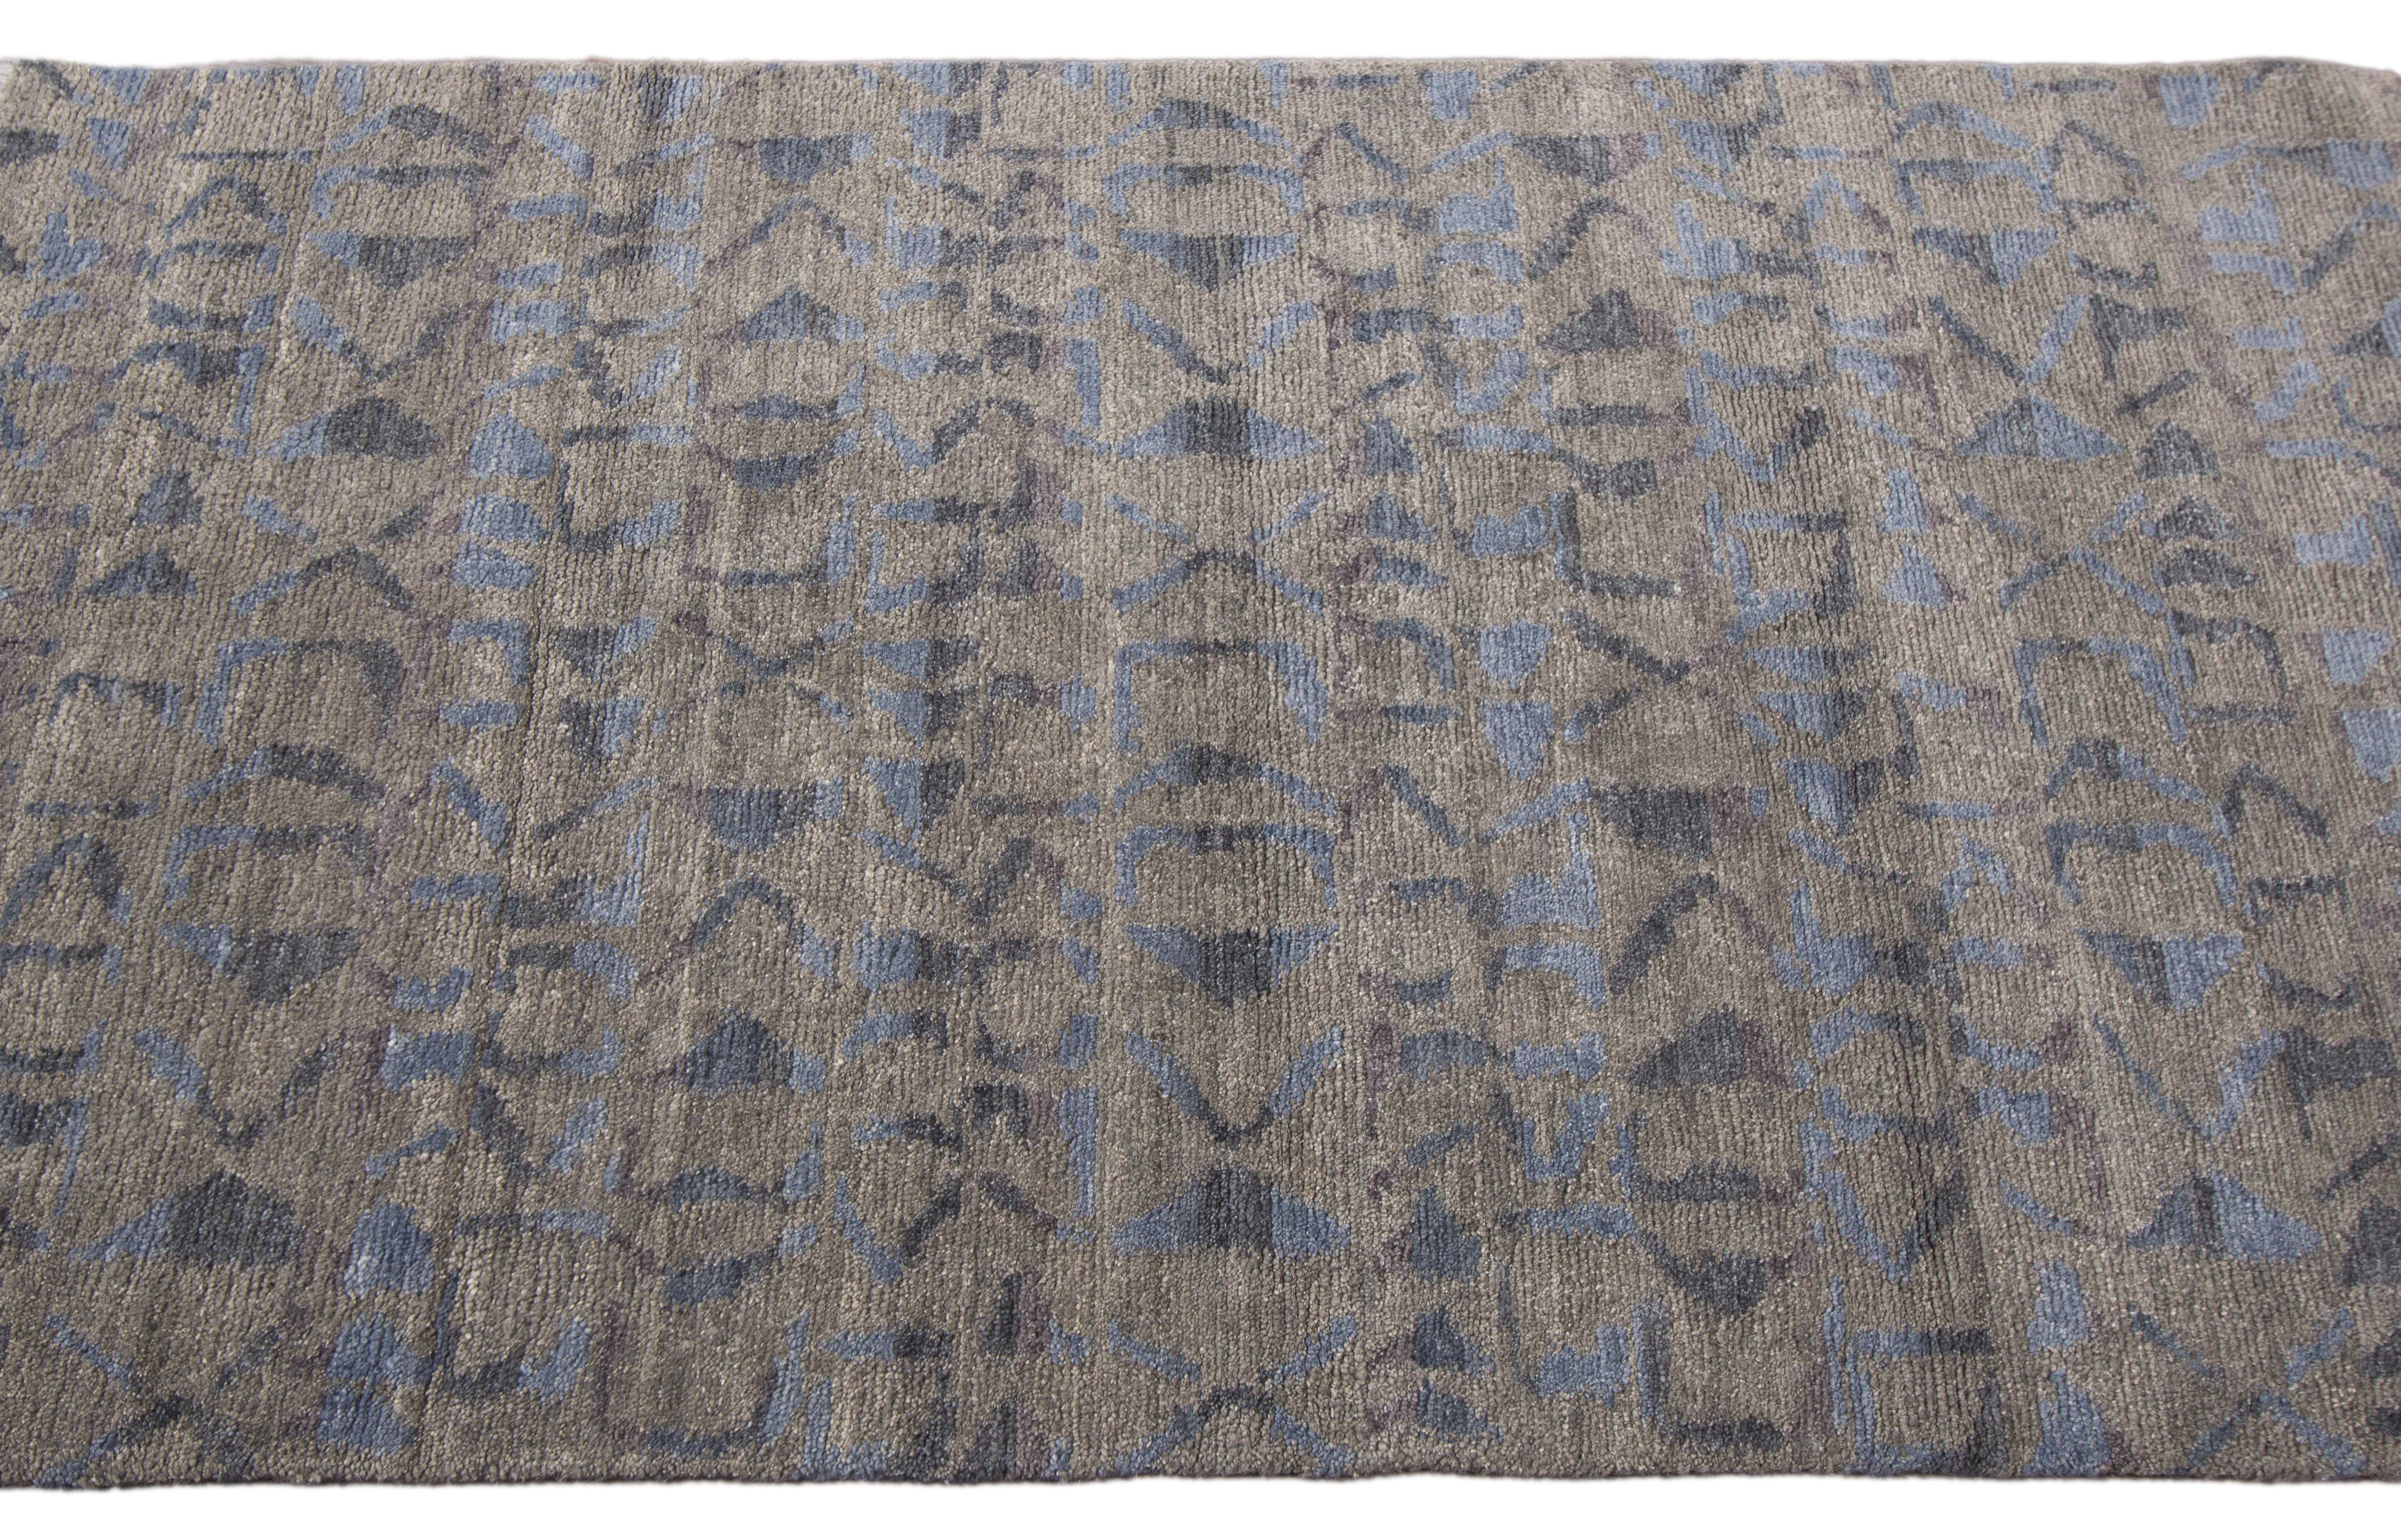 Hand-knotted rug with an all-over design on a blue field. Measures: 9' x 12'.